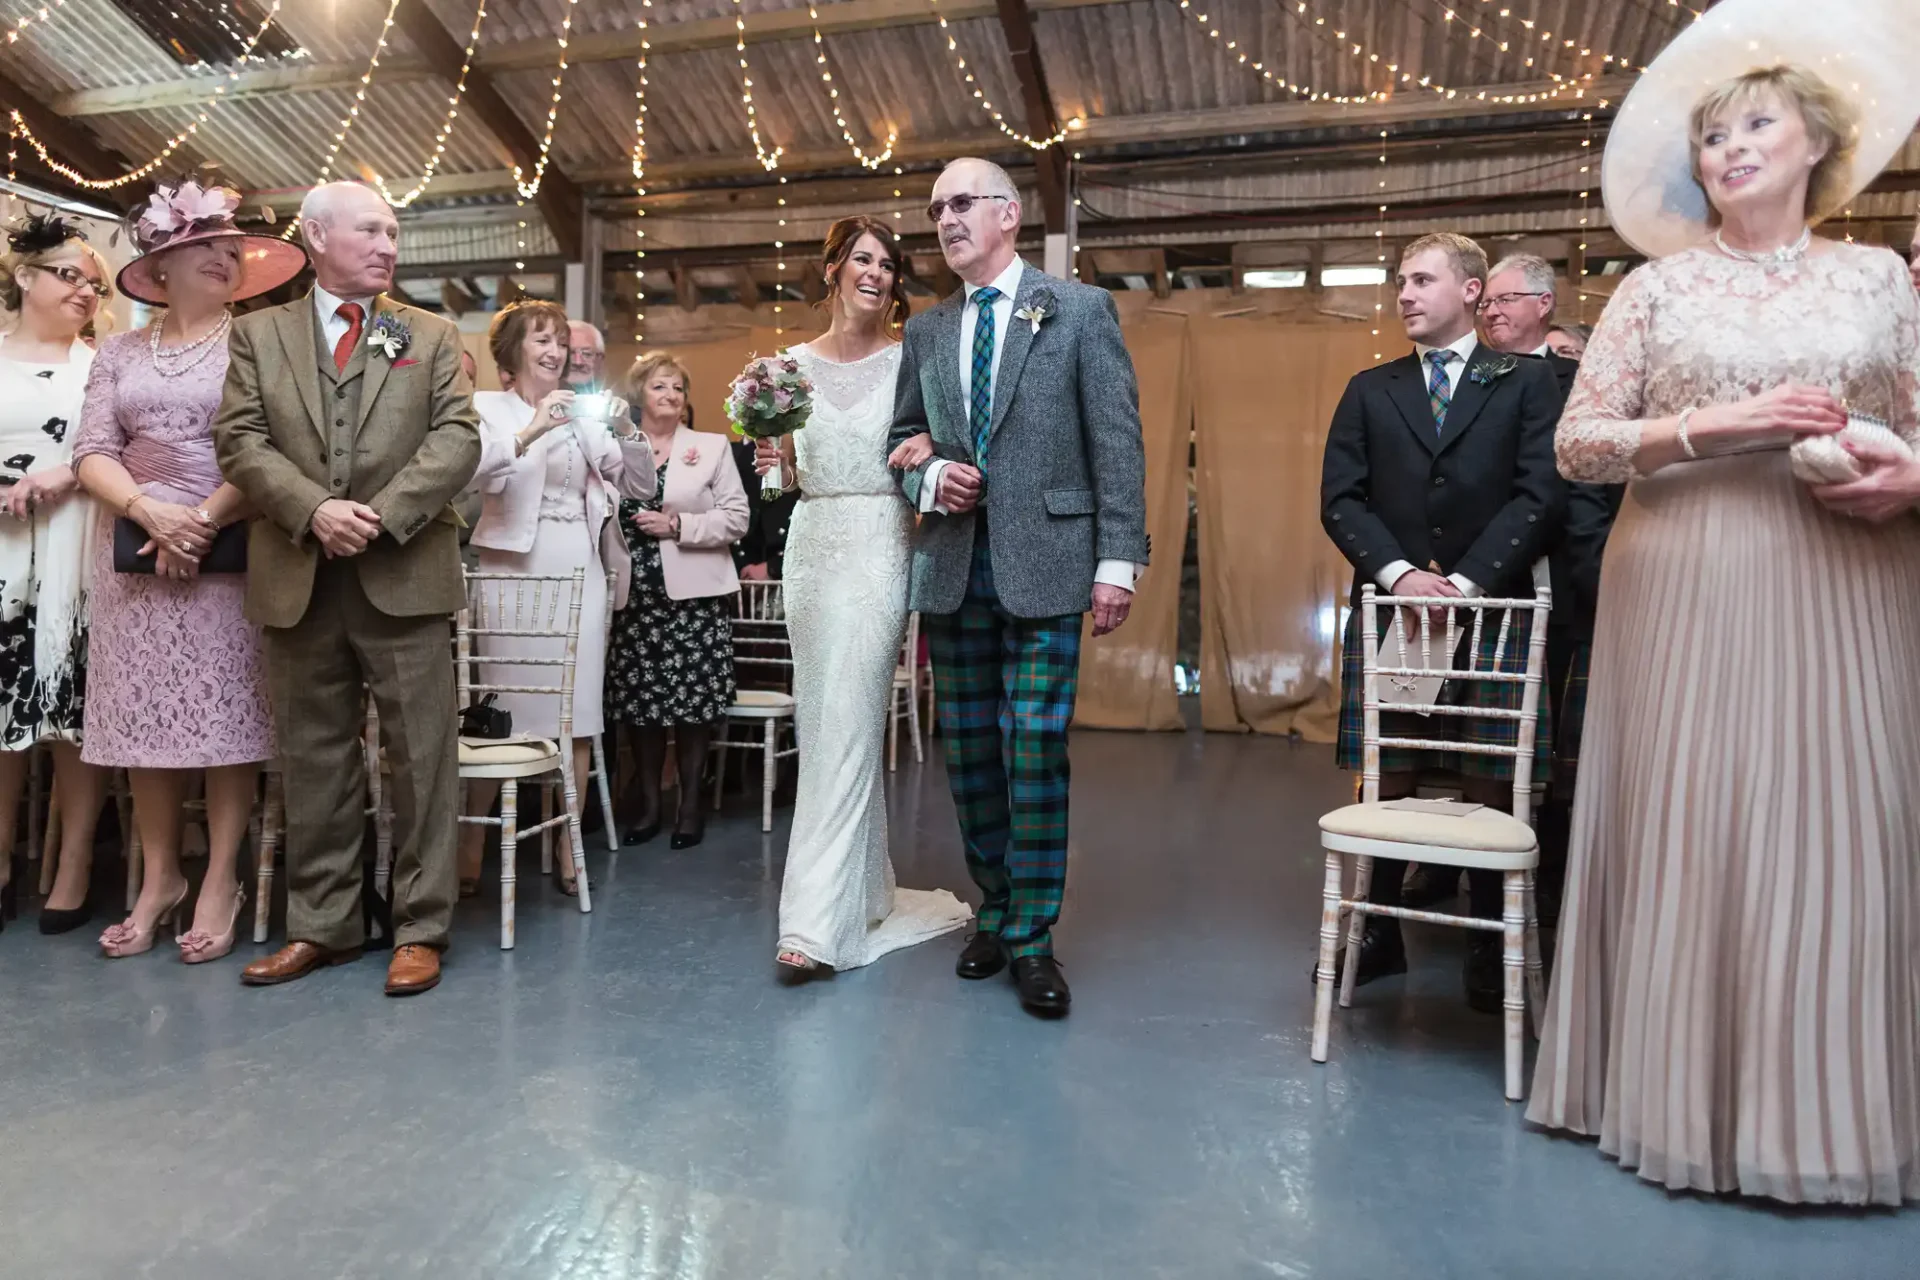 Bride and groom walking down the aisle, surrounded by guests in elegant attire, in a rustic indoor setting.